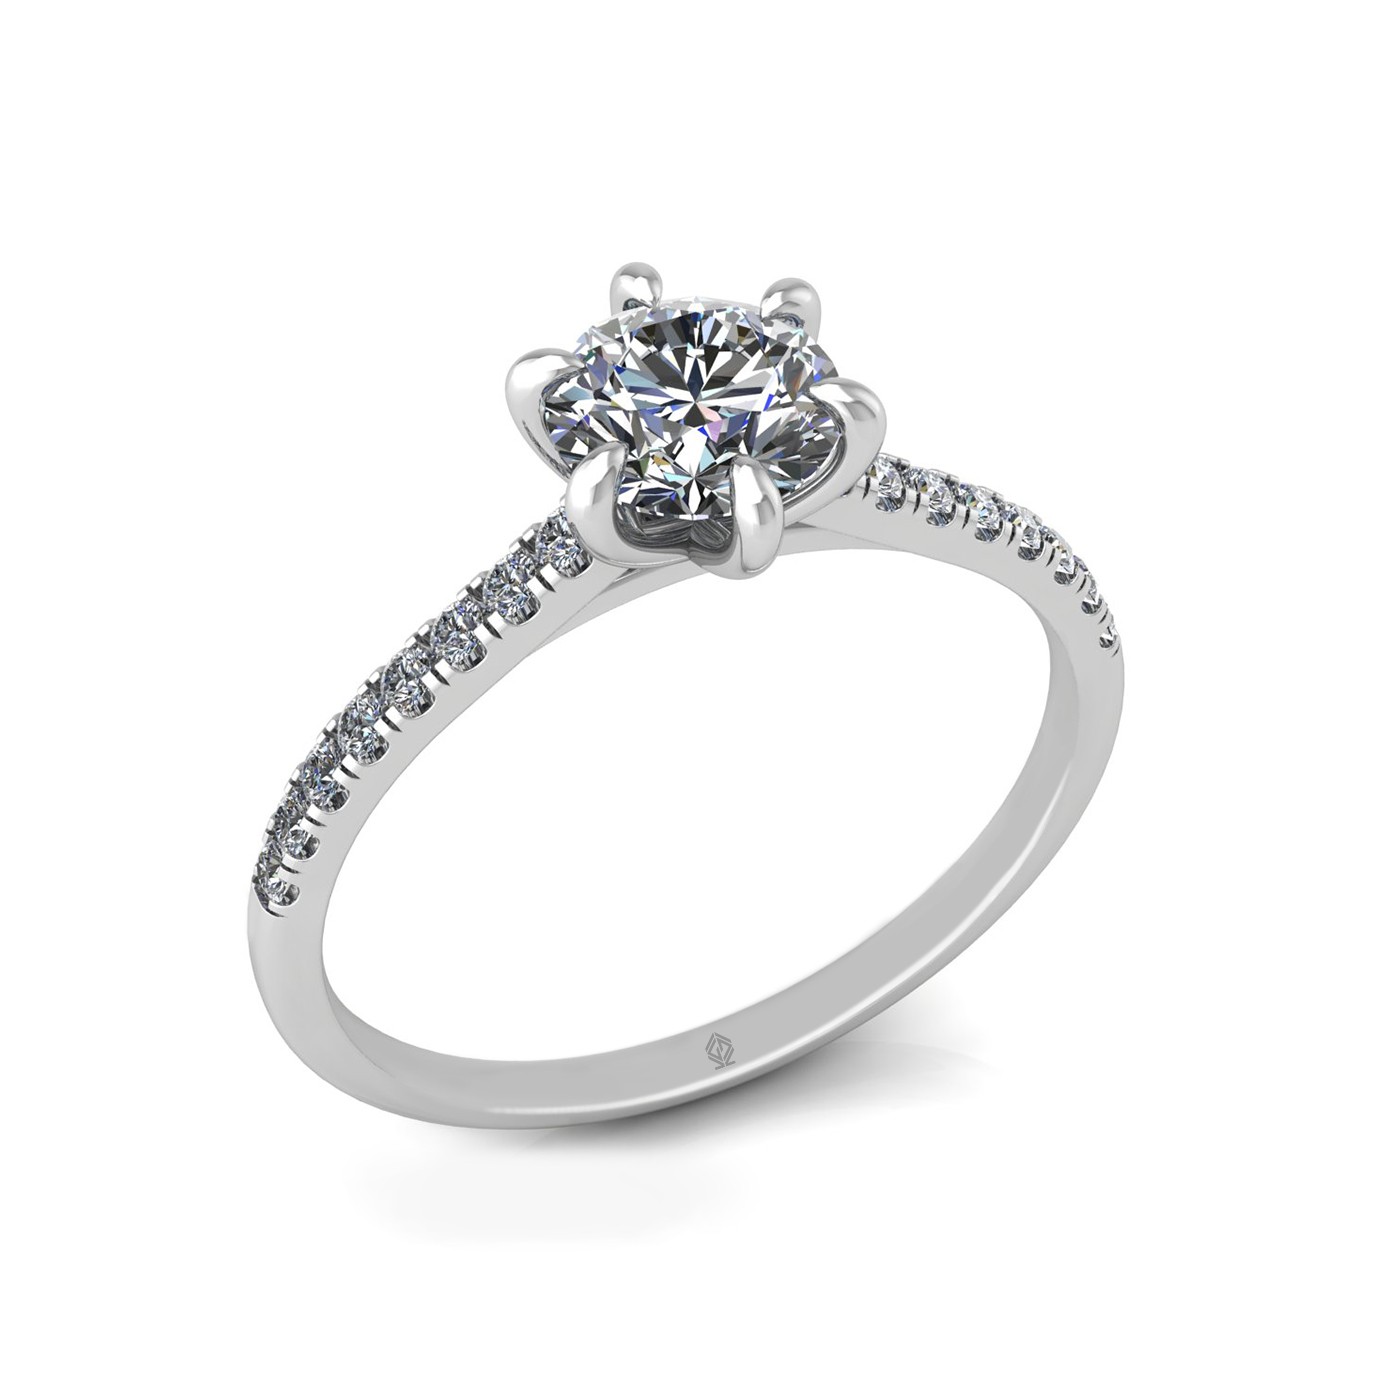 18k white gold 0,80 ct 6 prongs round cut diamond engagement ring with whisper thin pavÉ set band